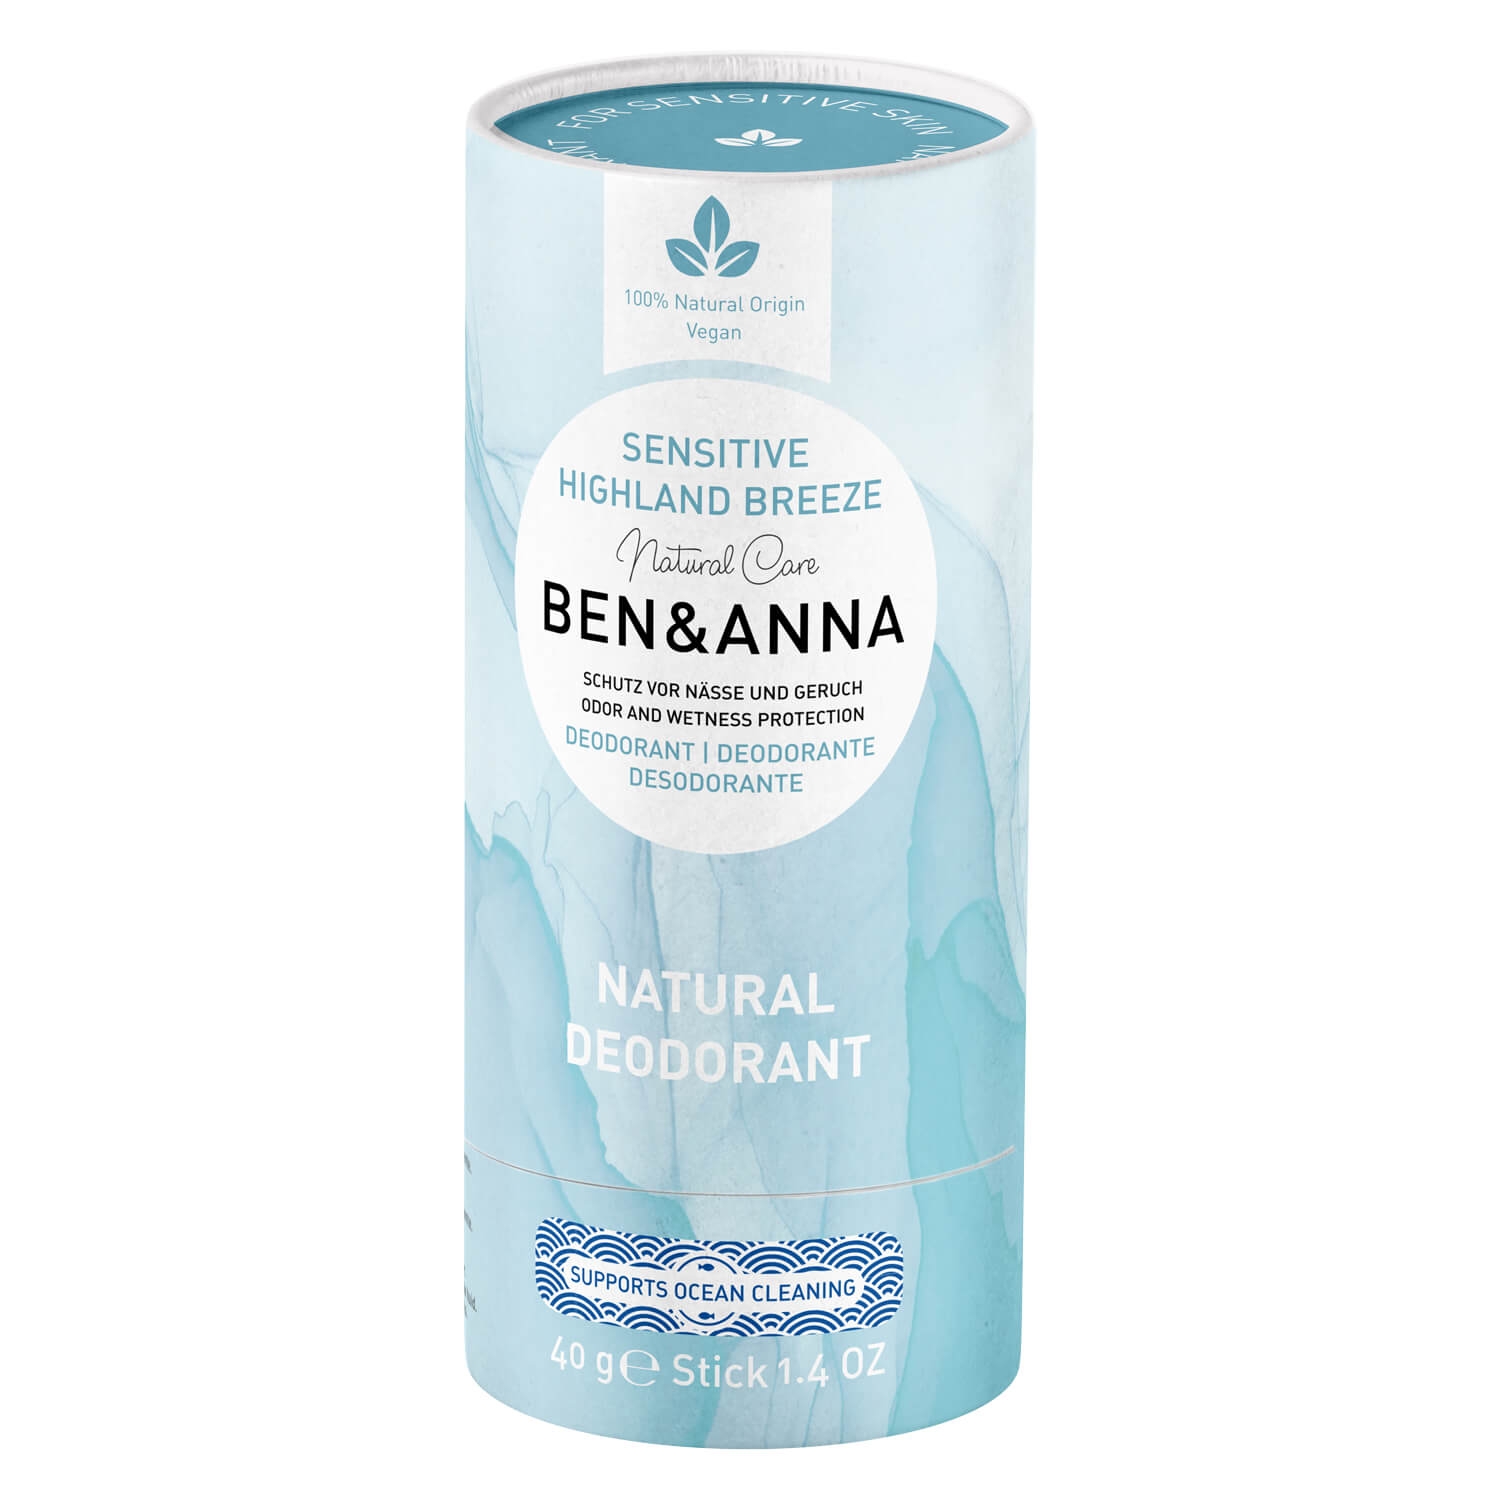 Product image from BEN&ANNA - Sensitive Highland Breeze Natural Deo